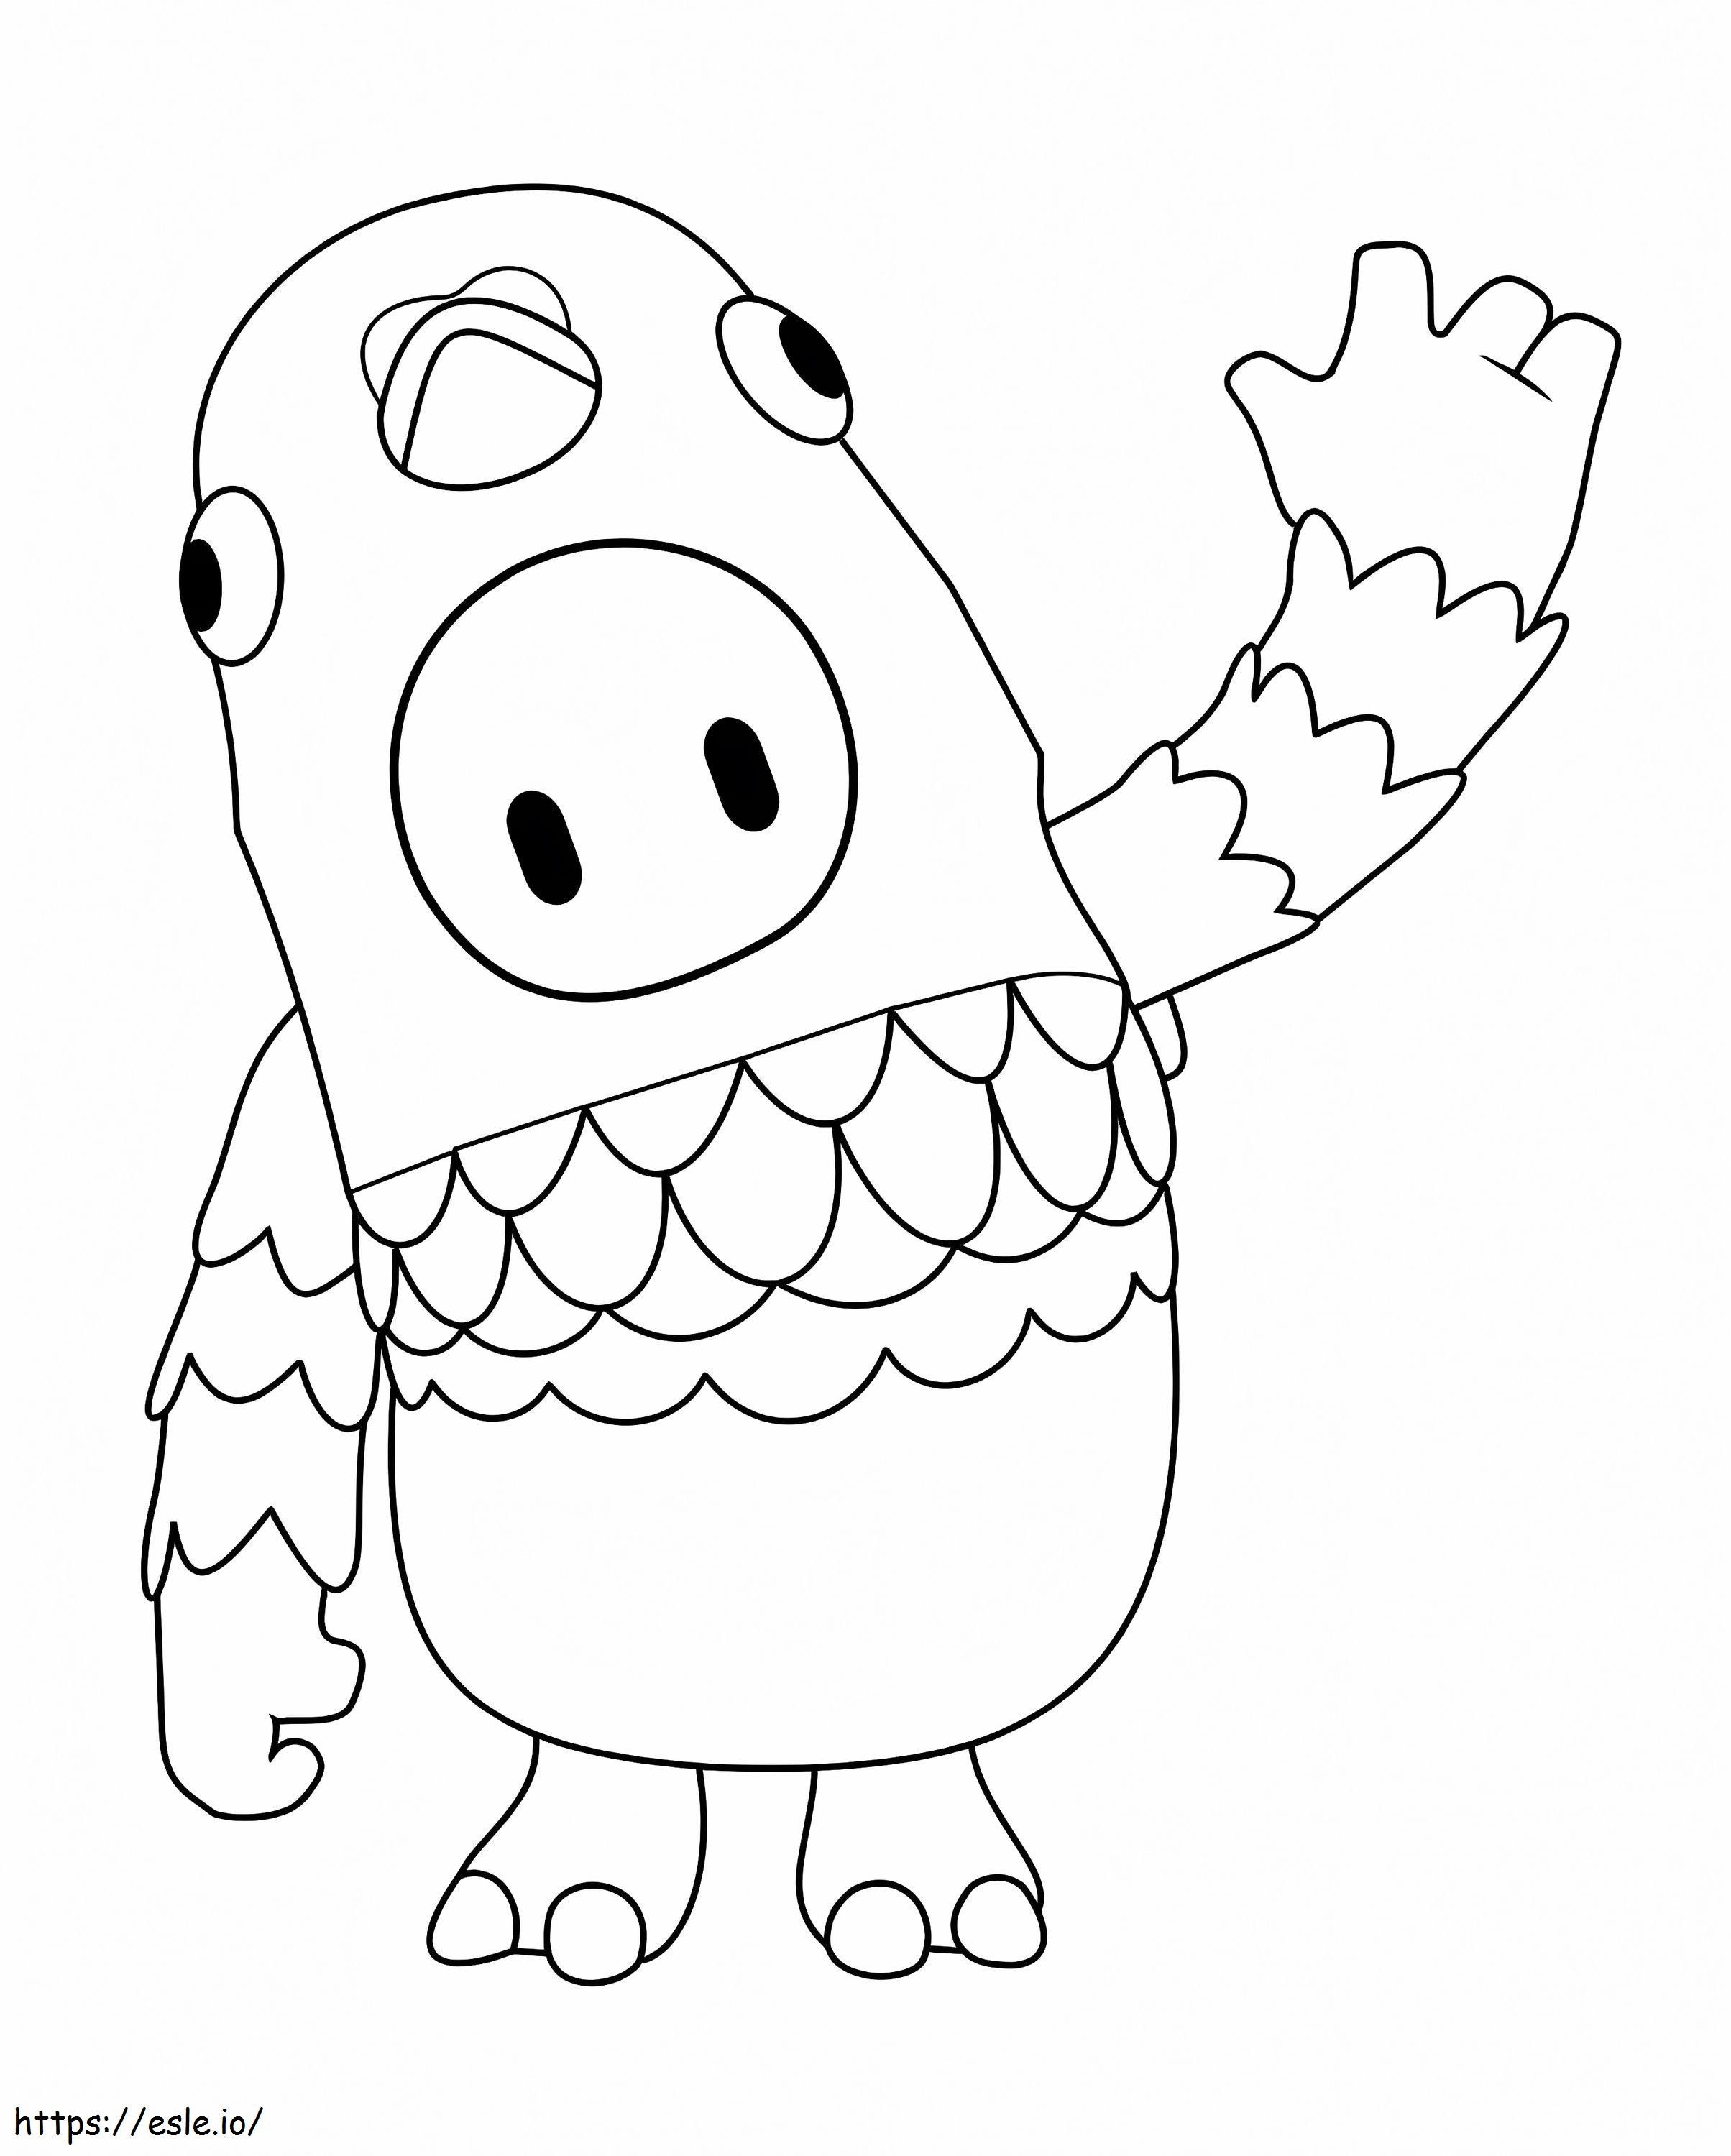 Dove Skin Fall Guys coloring page